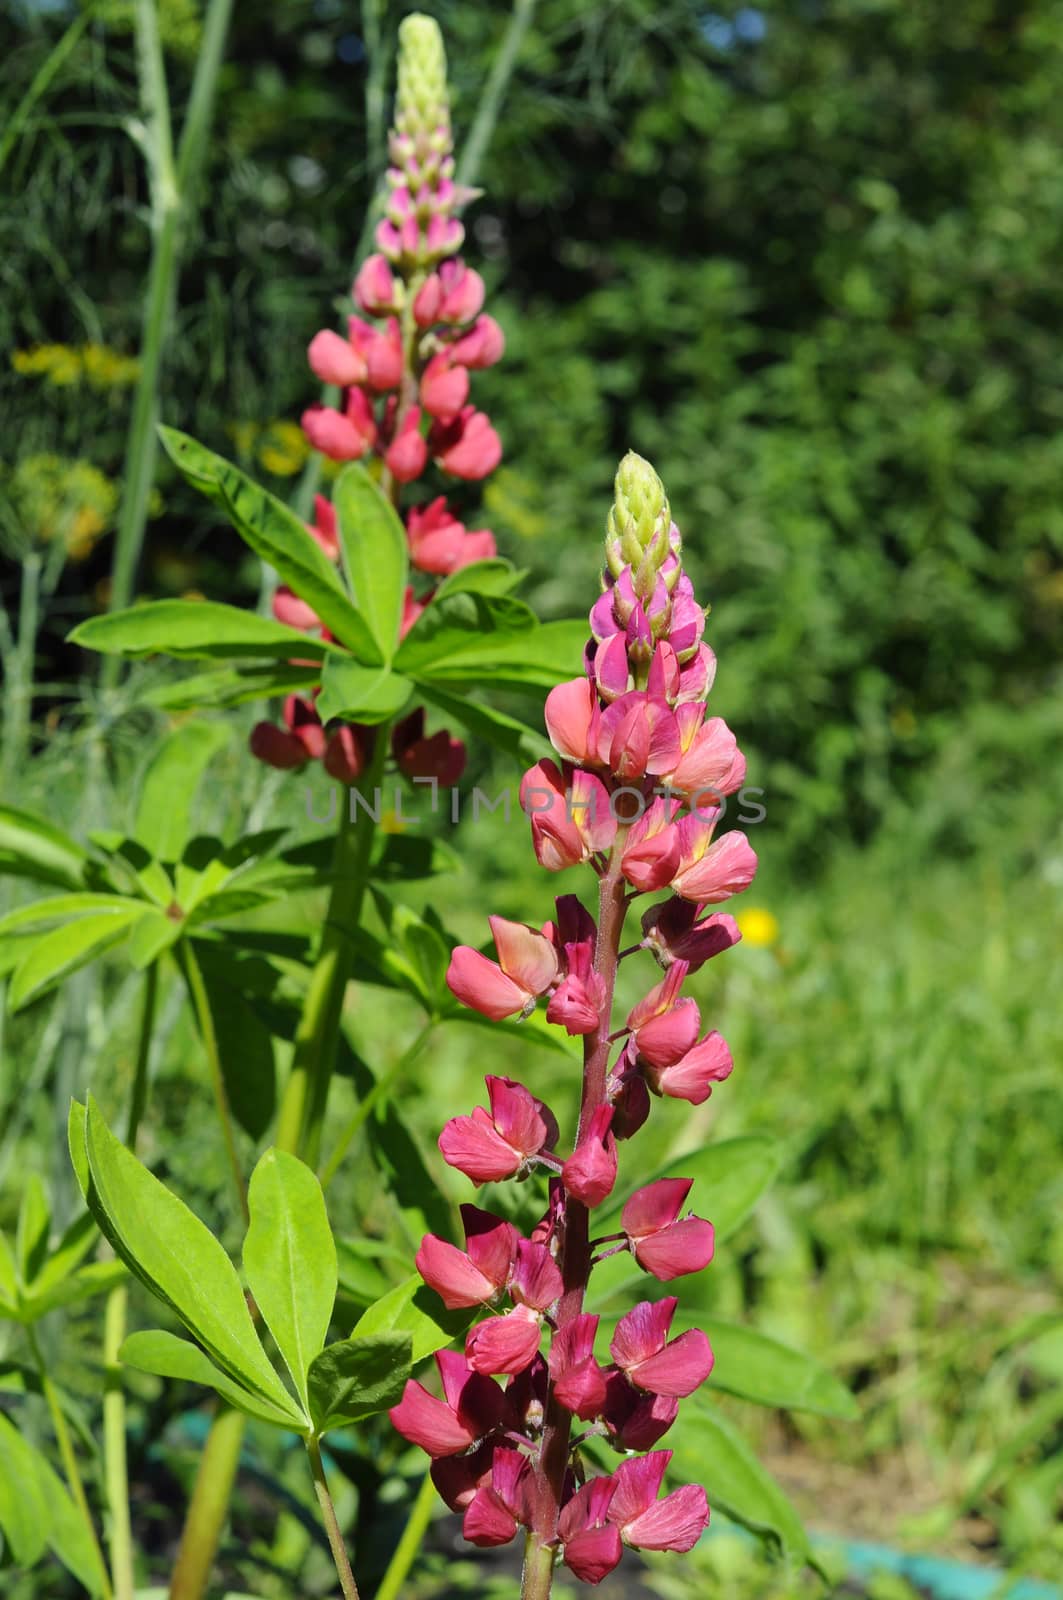 The blossoming pink lupine in a garden. by veronka72